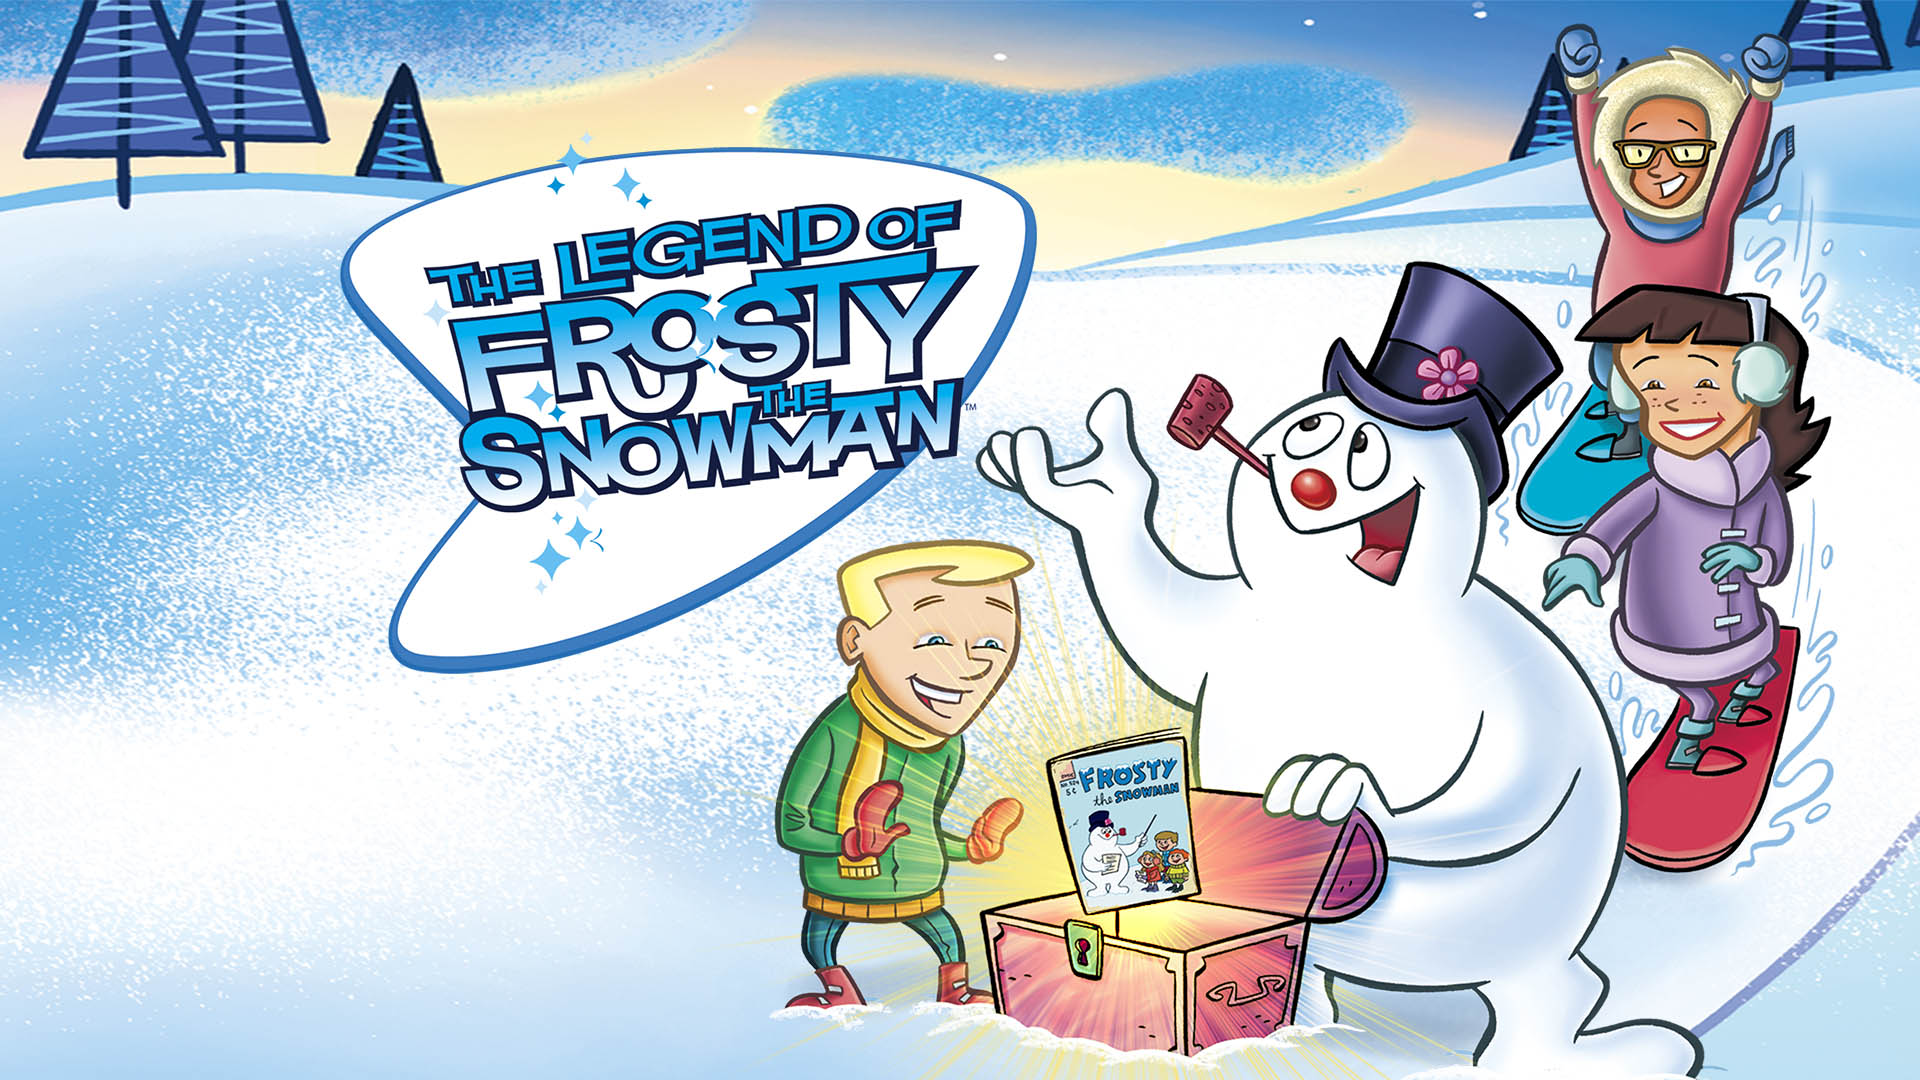 Watch Legend of Frosty the Snowman Online | Stream Full Movies